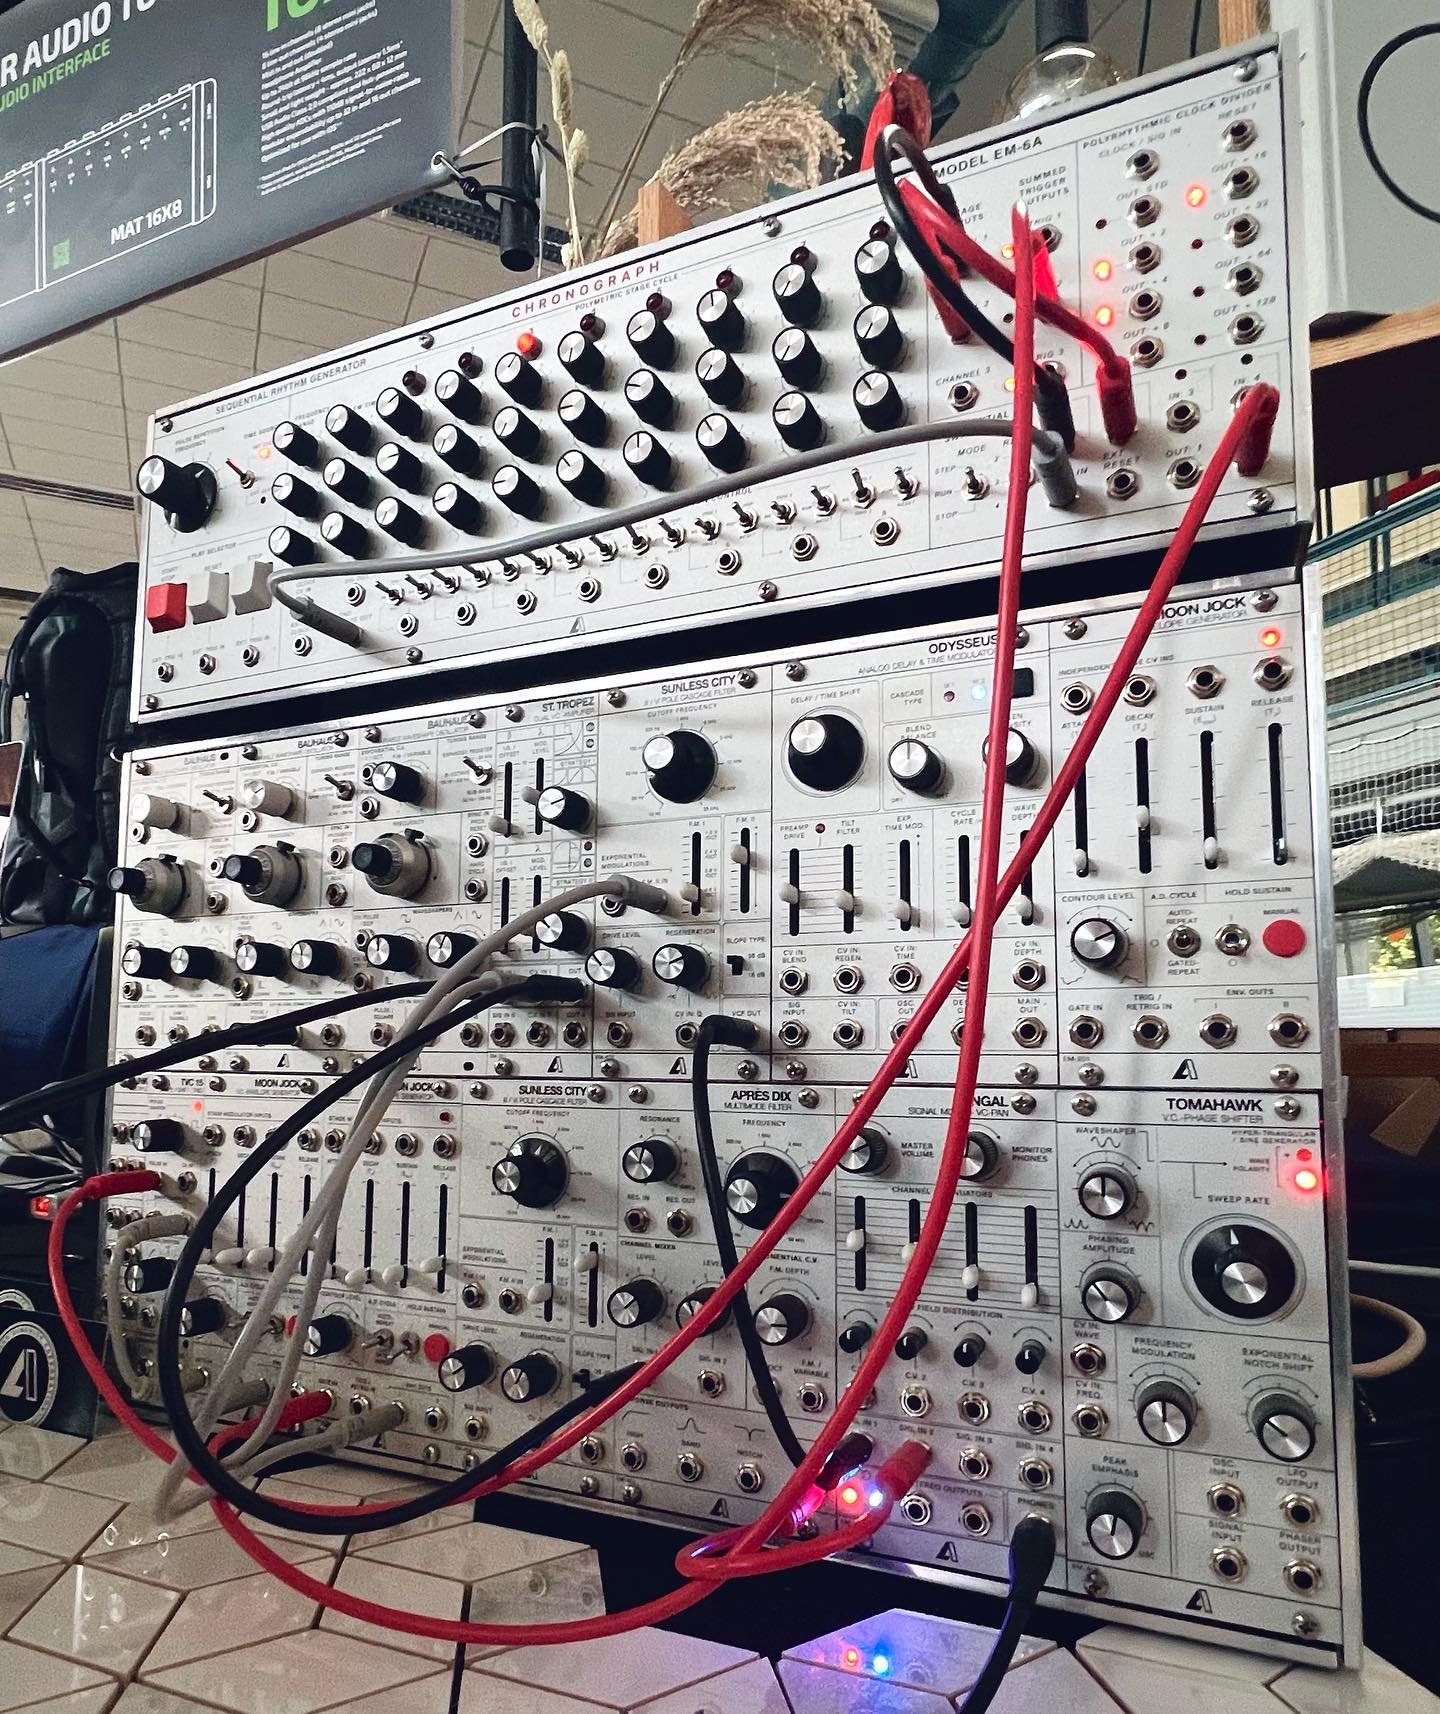 Superbooth &lsquo;24 |  Booth W240  #Synthesizers #ModularSynth #Eurorack #Berlin